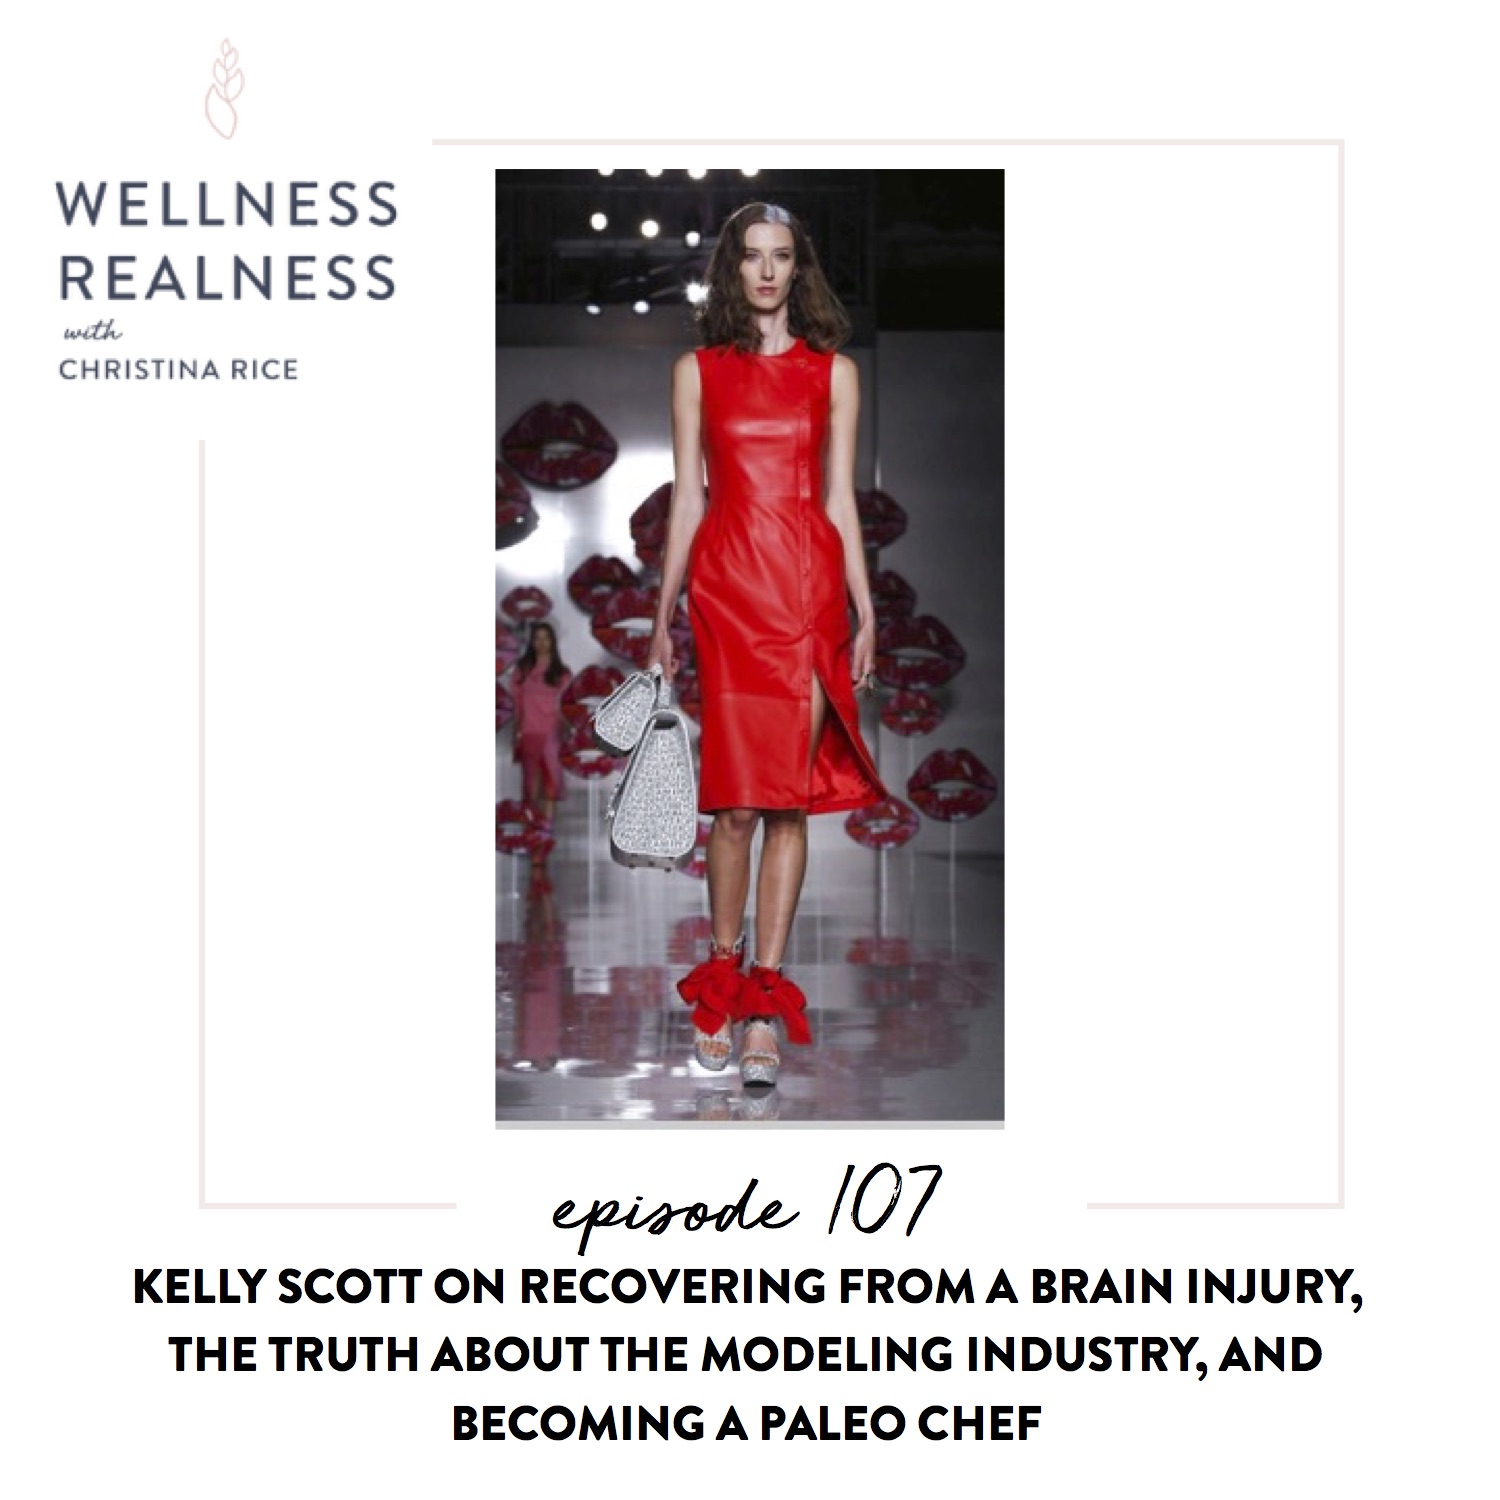 107: Kelly Scott on Recovering from a Brain Injury, the Truth About the Modeling Industry, and Becoming a Paleo Chef